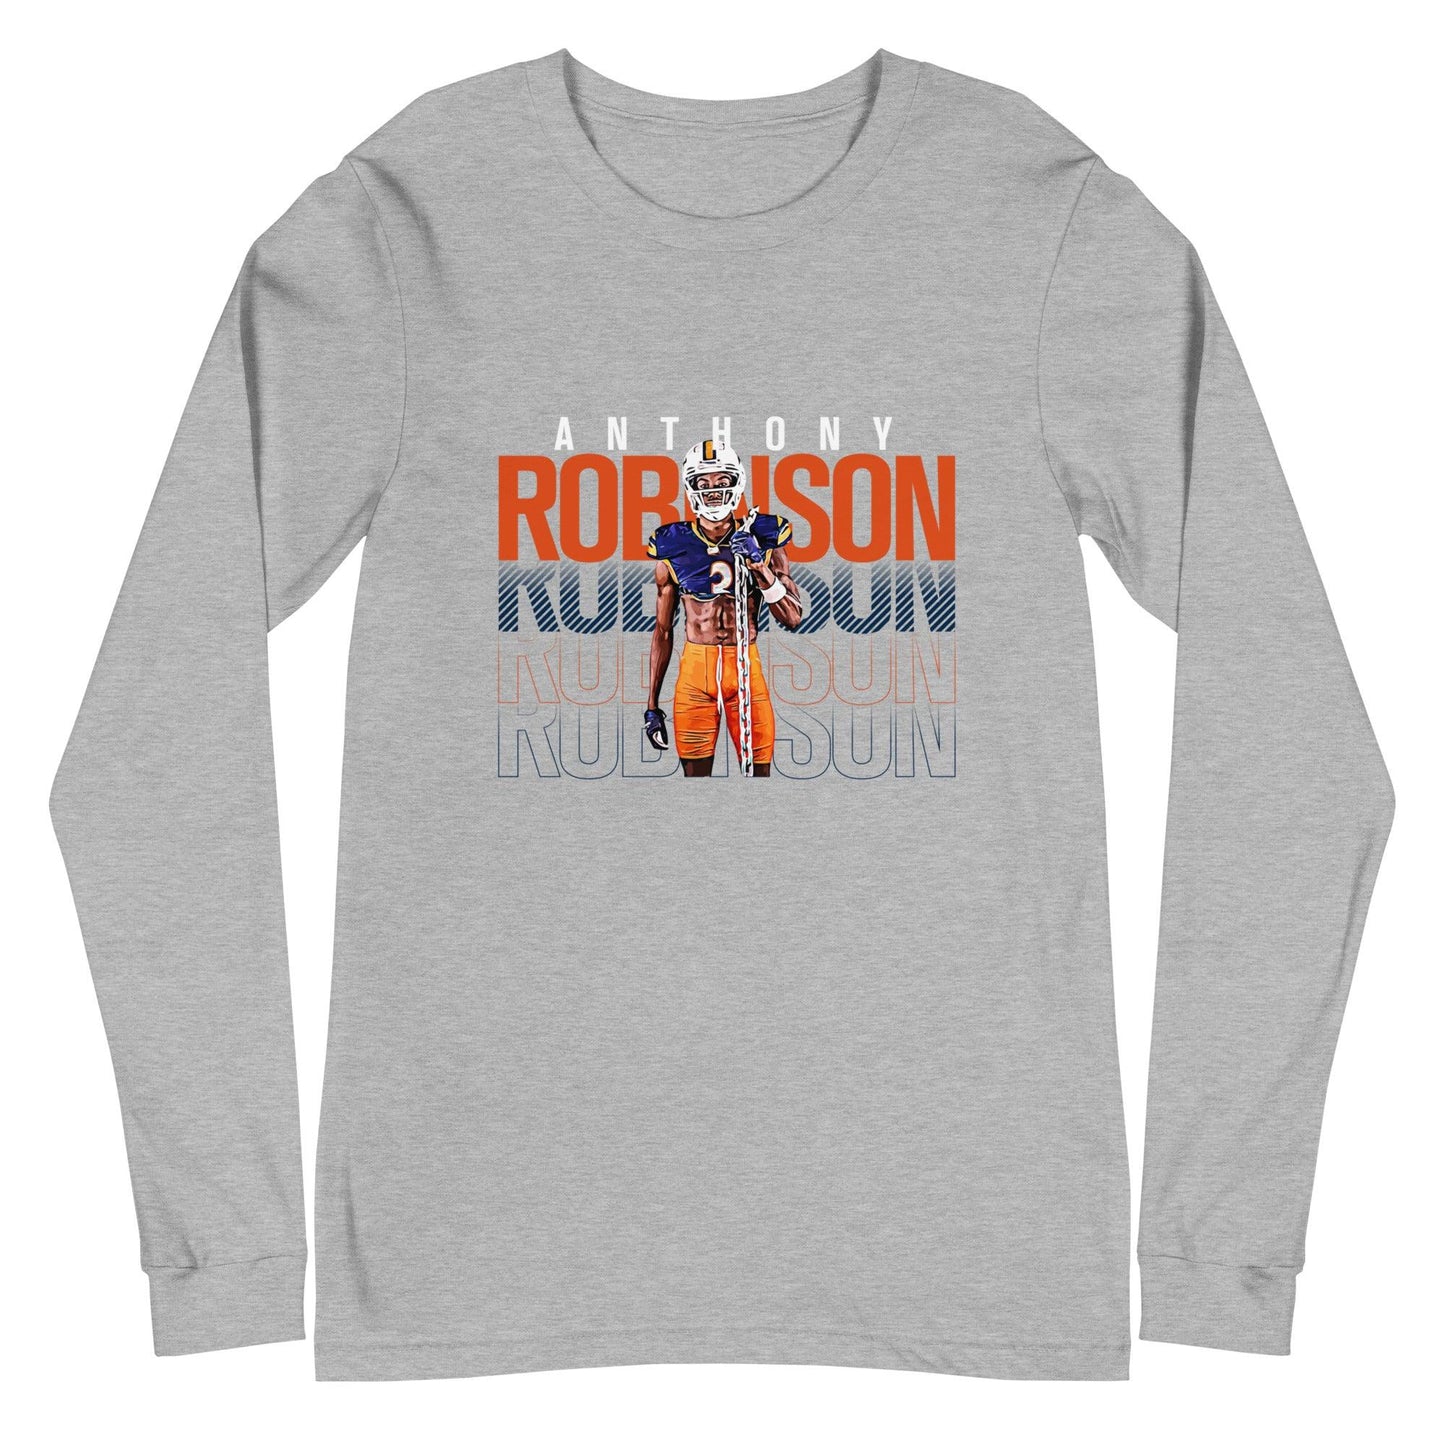 Anthony Robinson "Gameday" Long Sleeve Tee - Fan Arch